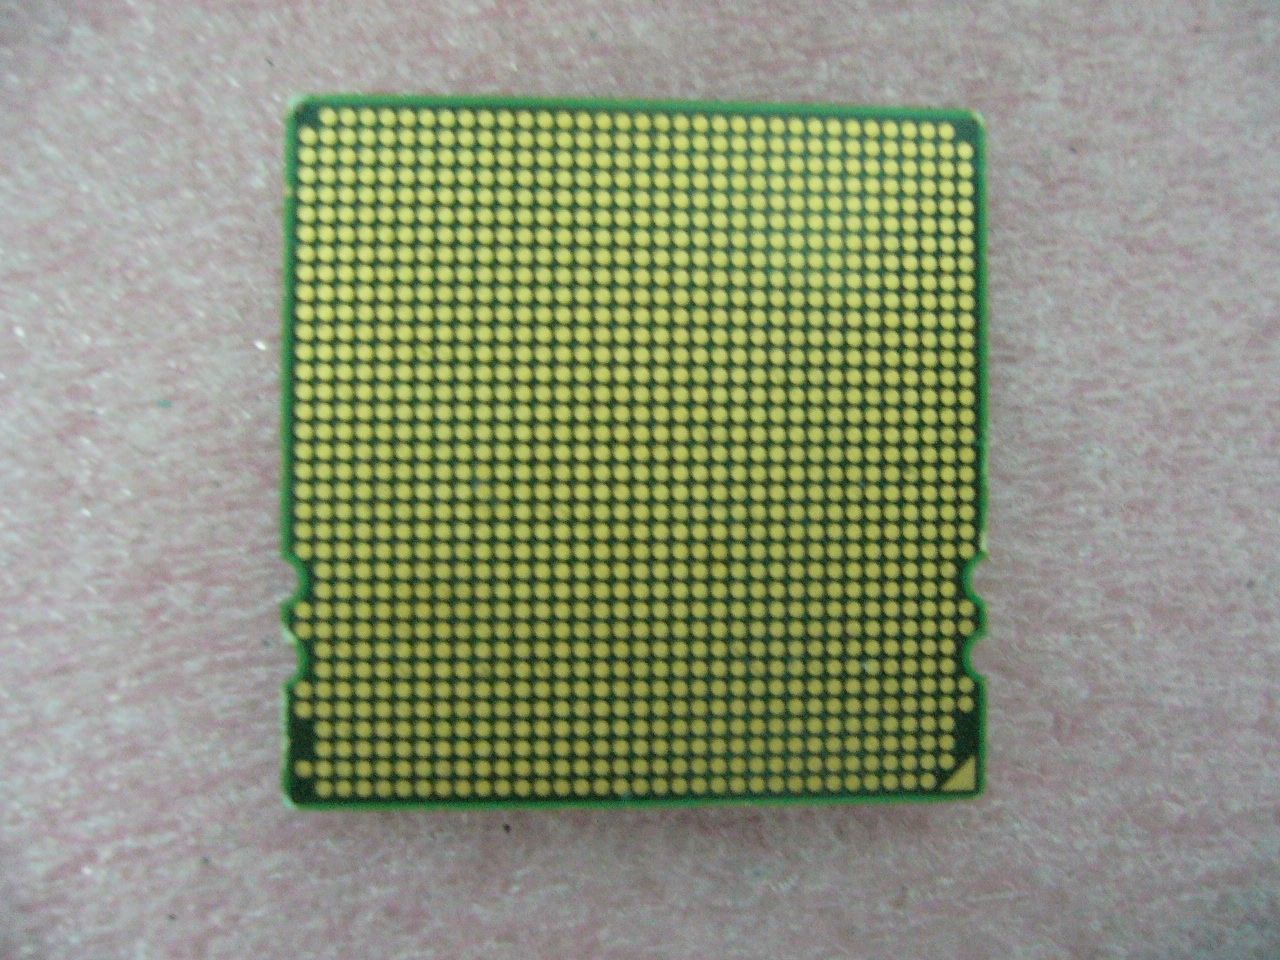 QTY 1x AMD Opteron 2350 2.0 GHz Quad-Core (OS2350WAL4BGD) CPU Socket F 1207 - Click Image to Close